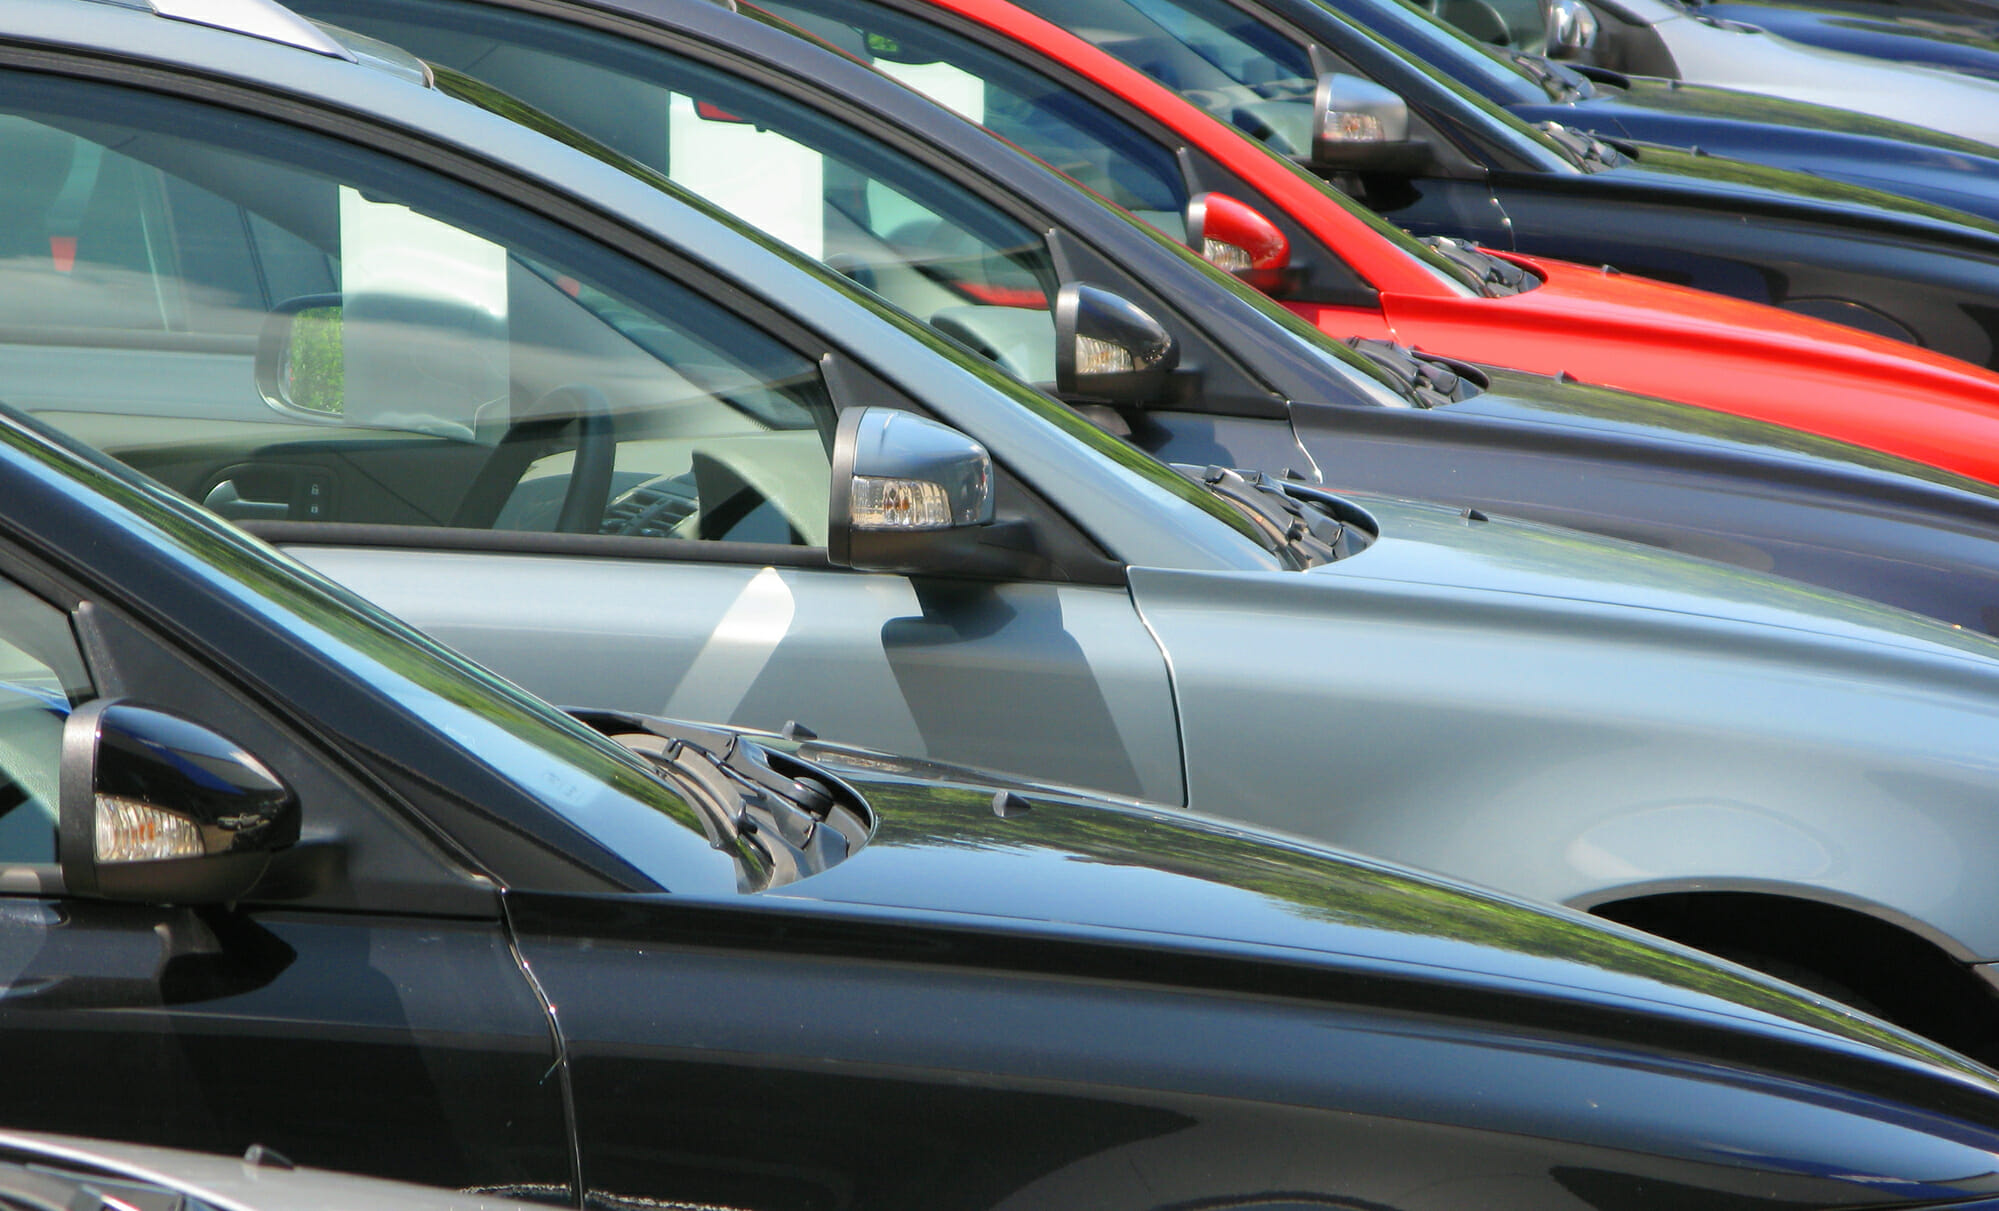 5 Used Cars You Should Never Buy